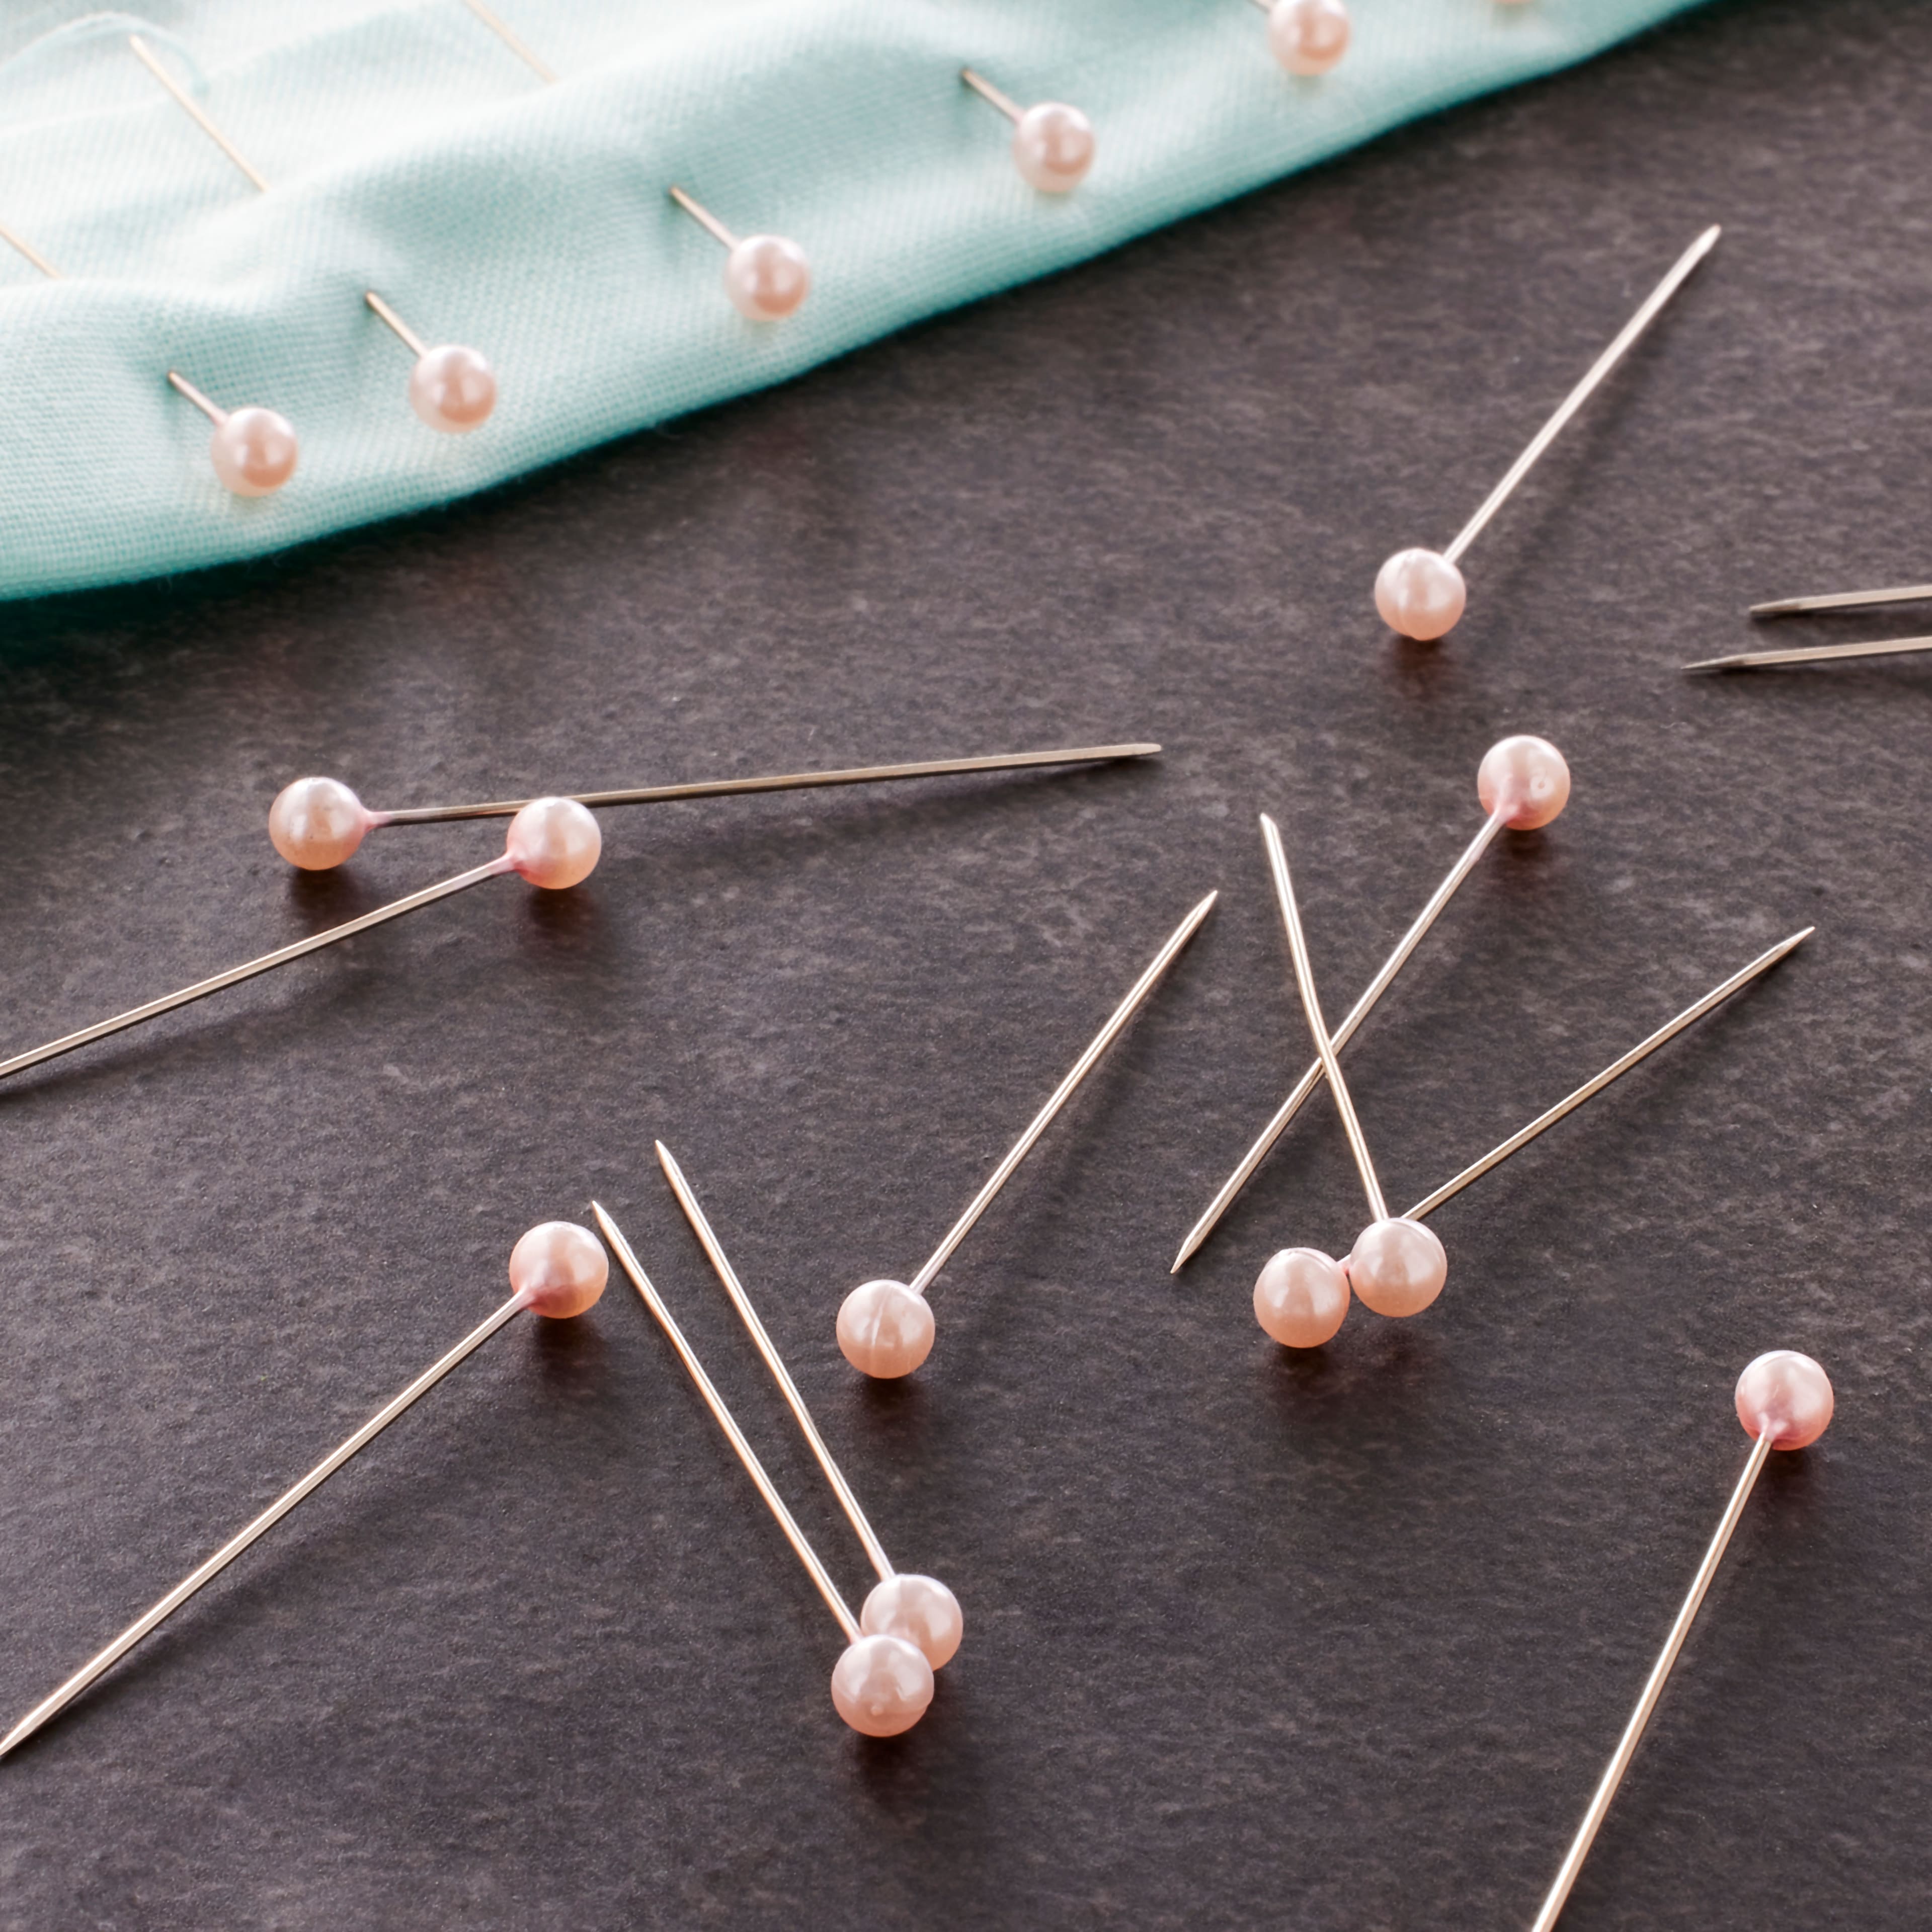 Loops &#x26; Threads&#x2122; Long Pearlized Pins